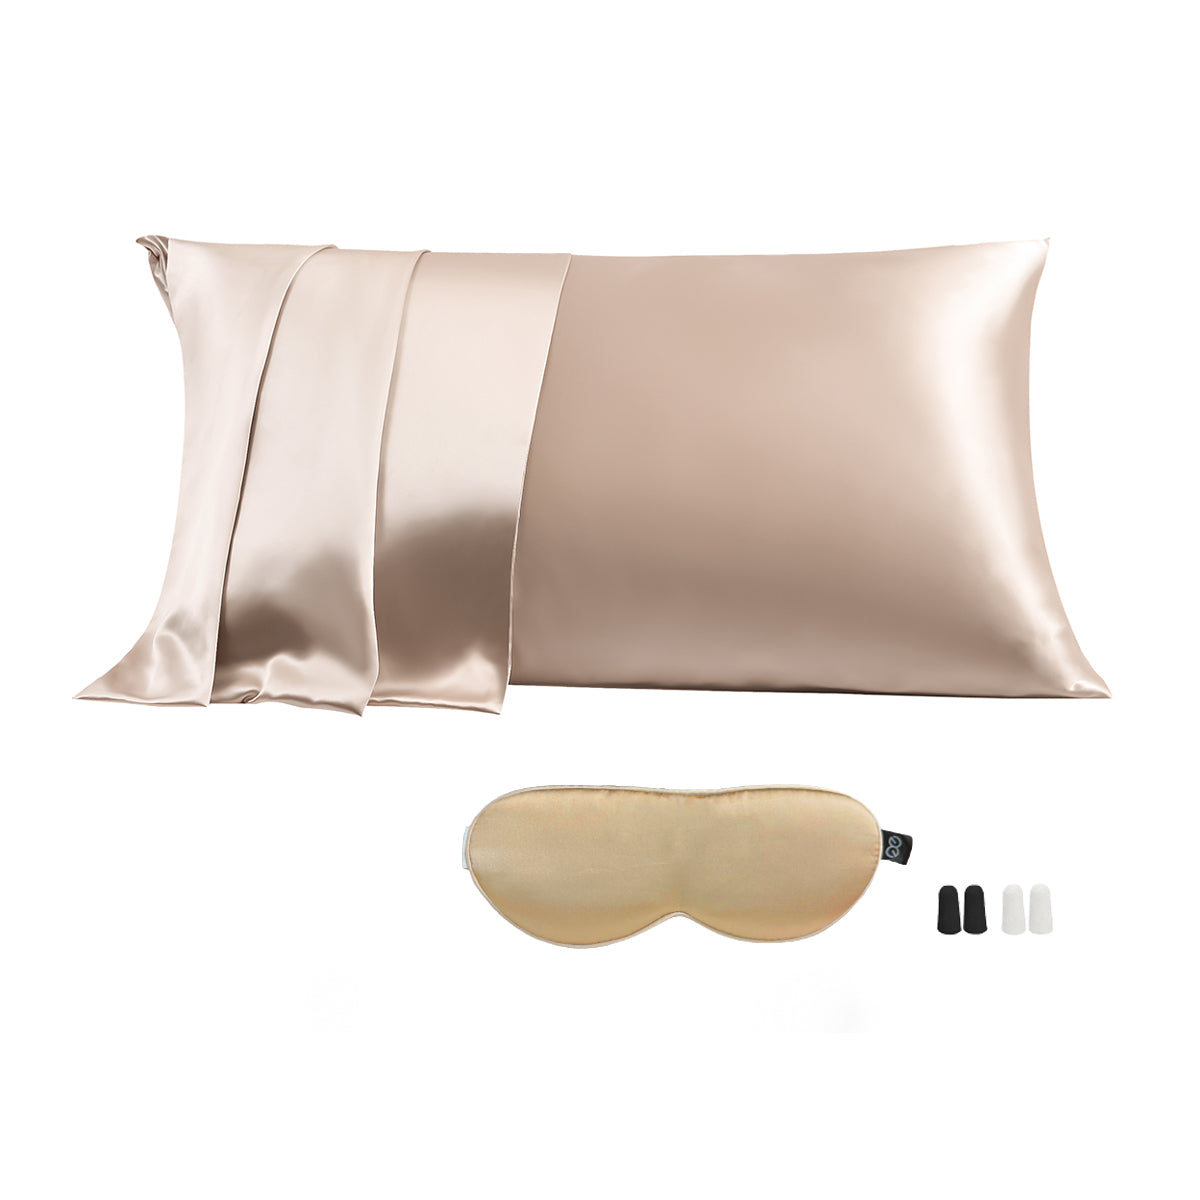 23mm 6A+Zipper Silk Pillowcase With Eye Mask With Gift Box